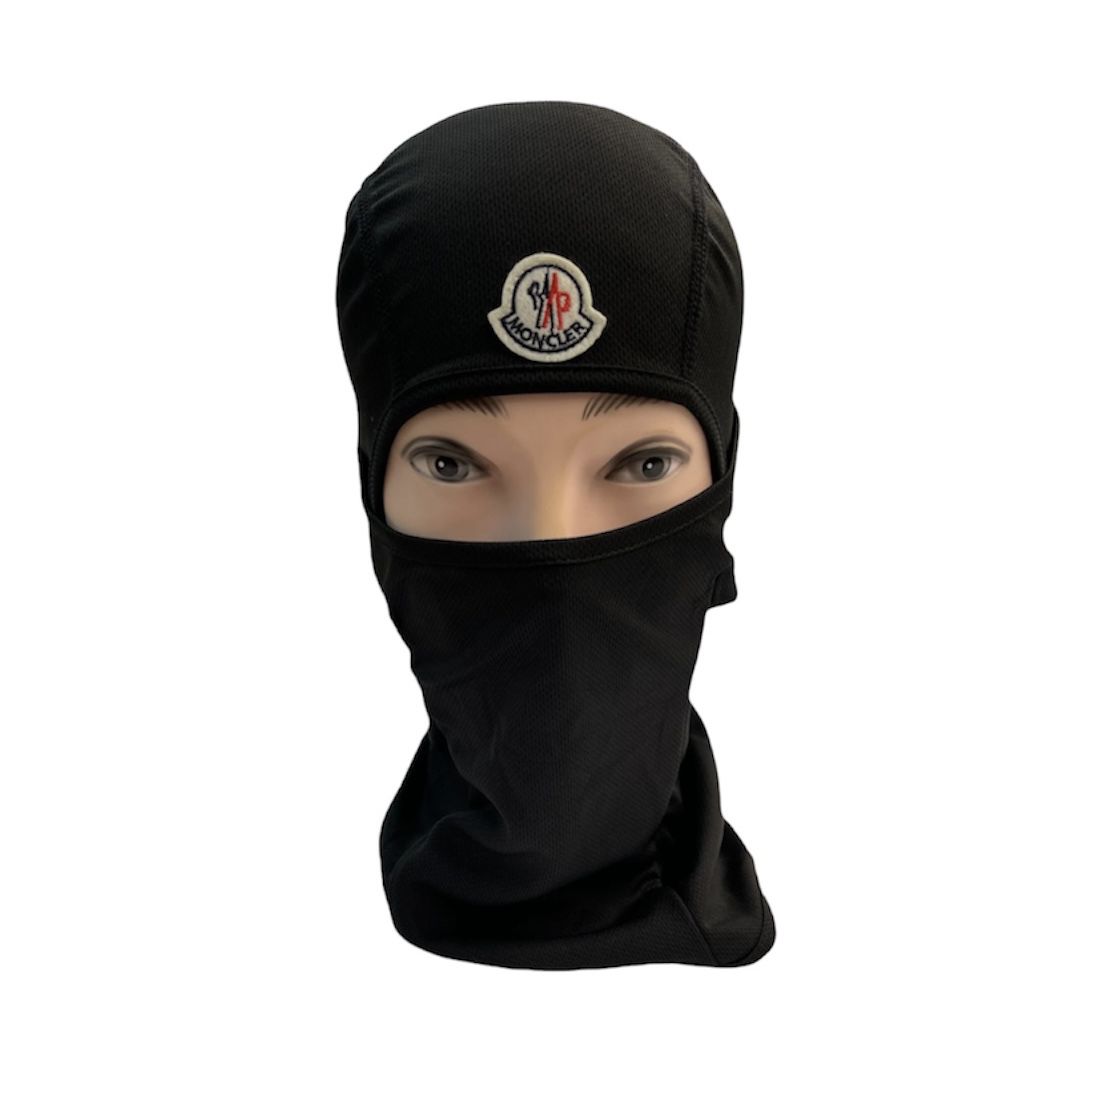 Moncler Balaclava ski Mask for Sale in Beverly Hills, CA - OfferUp